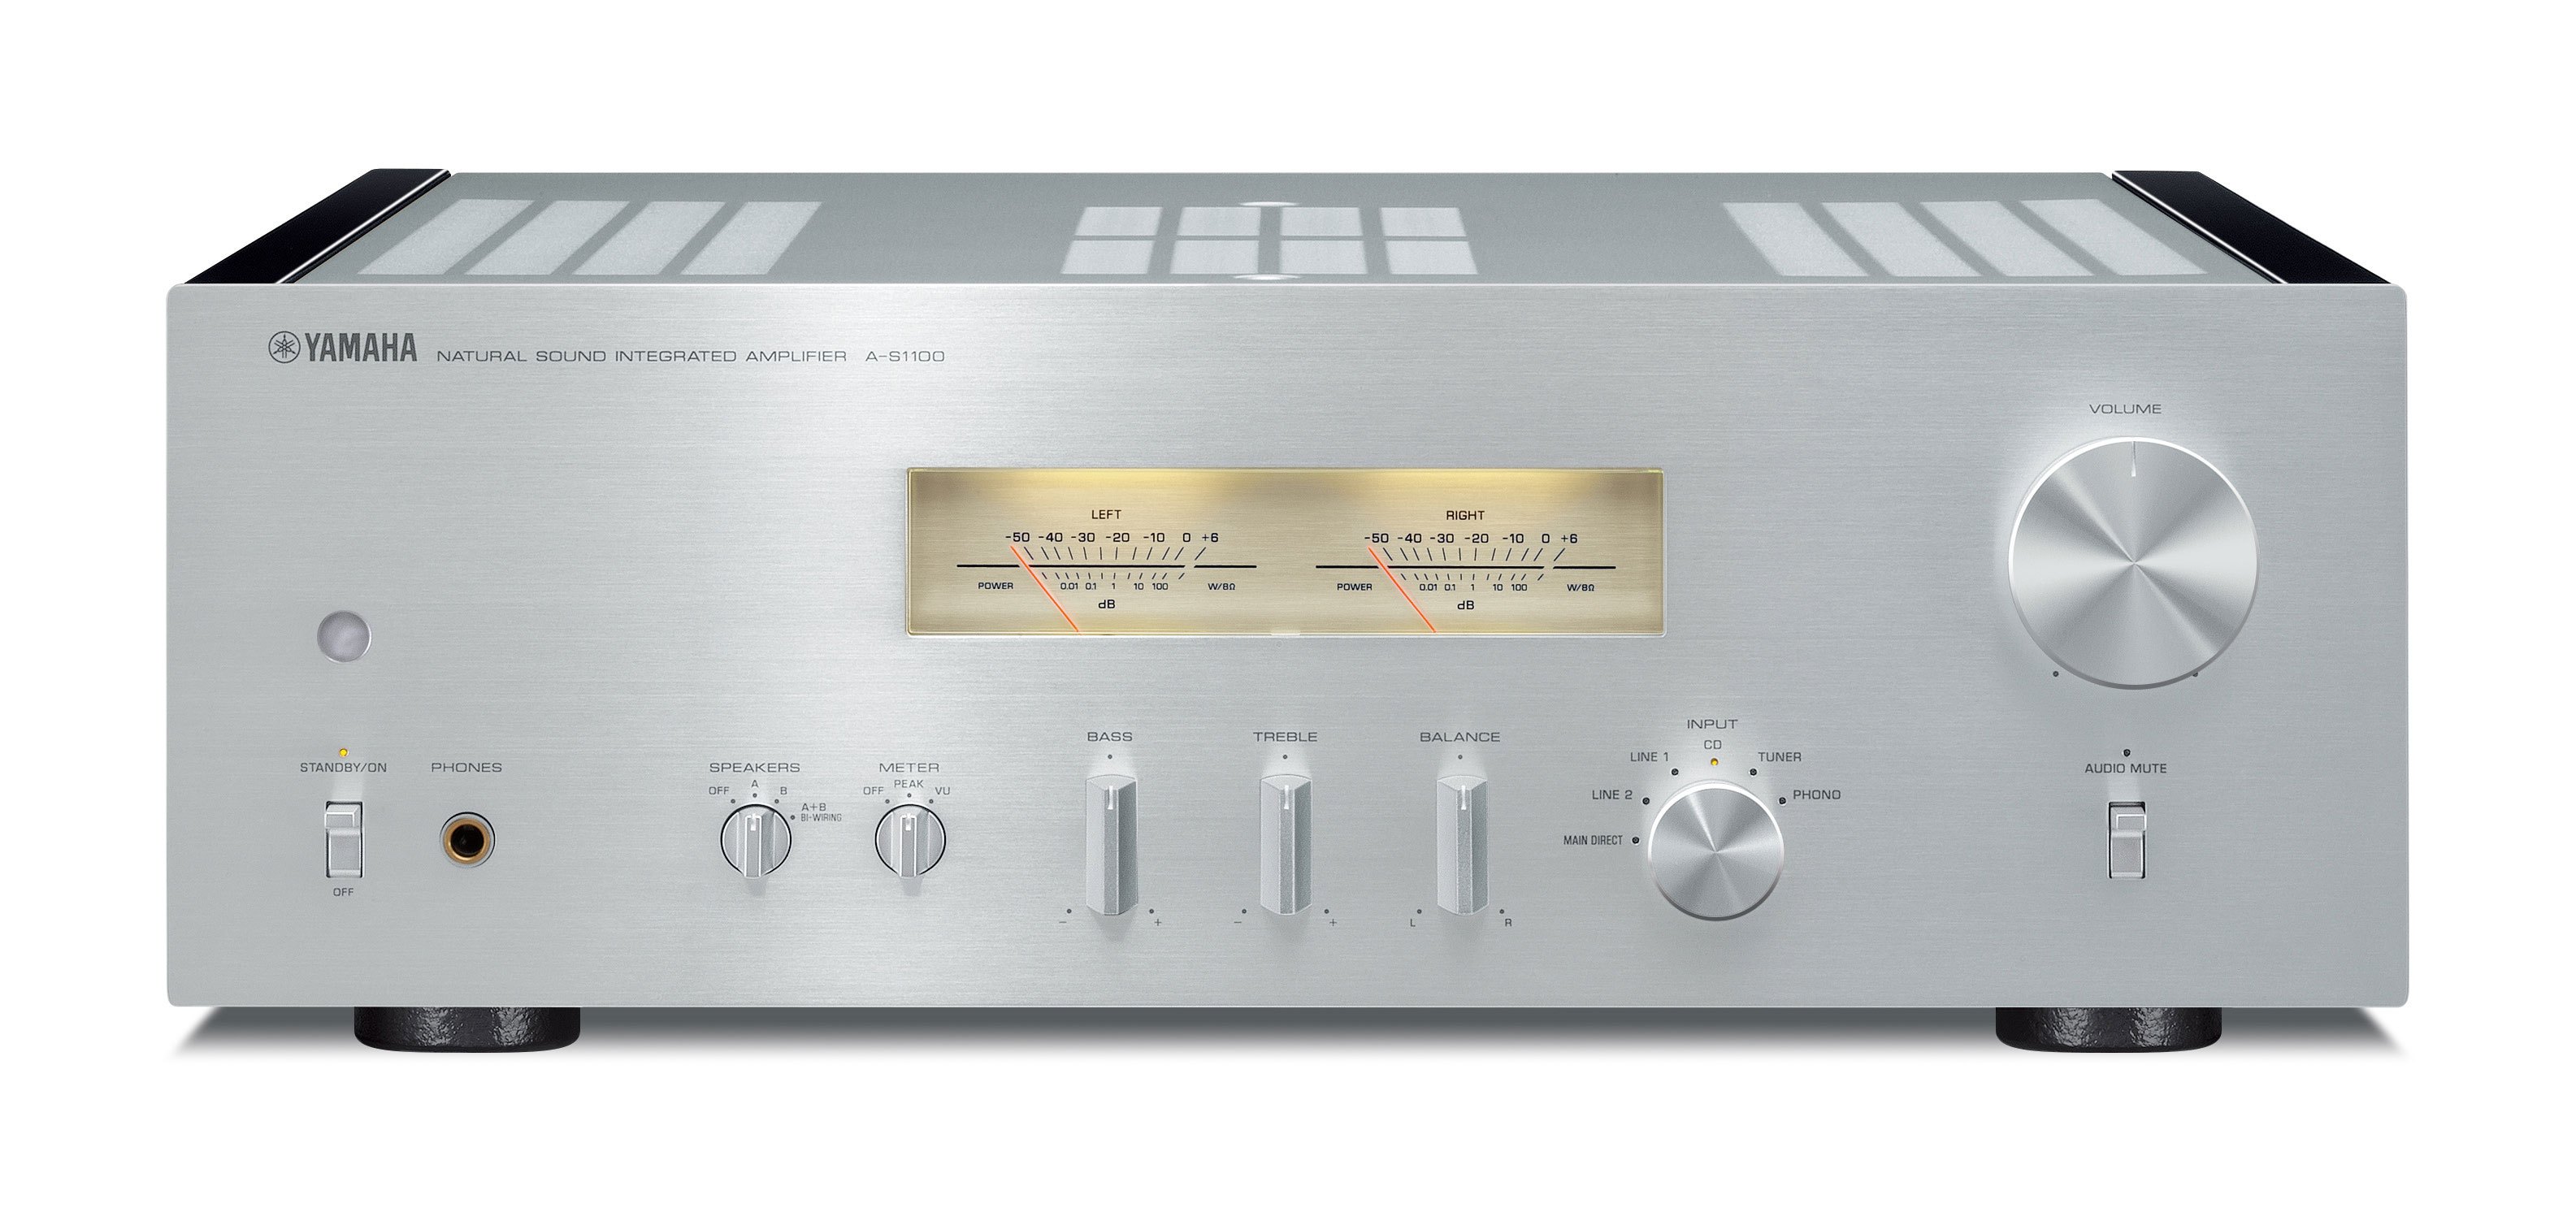 A-S1100 - Overview - HiFi Components - Audio & Visual - Products - Yamaha 